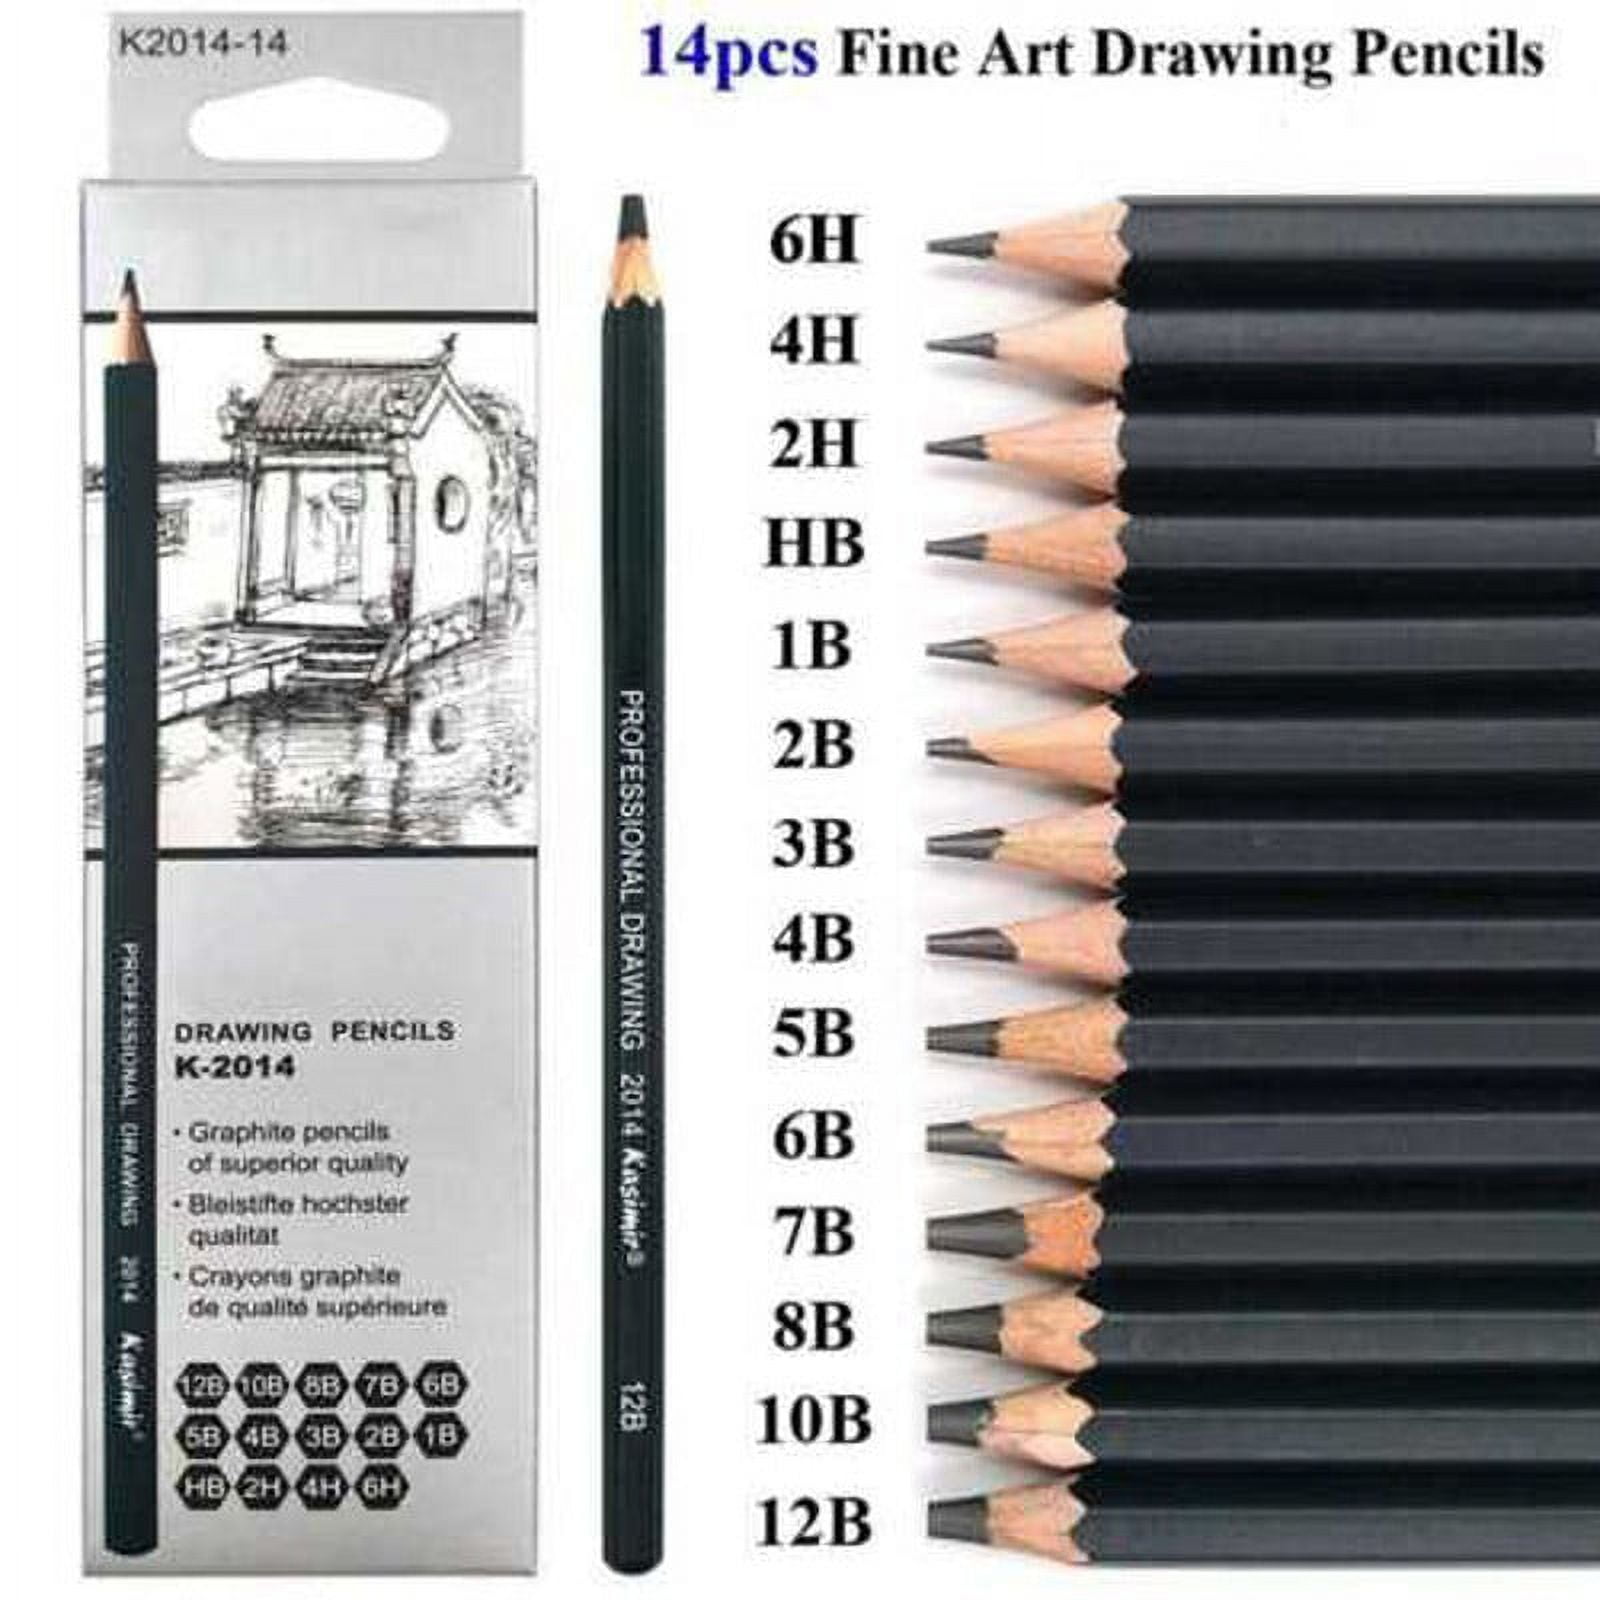 PANDAFLY Professional Drawing Sketching Pencil Set - 12 Pieces Graphite  Pencils(14B - 2H), Ideal for Drawing Art, Sketching, Shading, Artist  Pencils